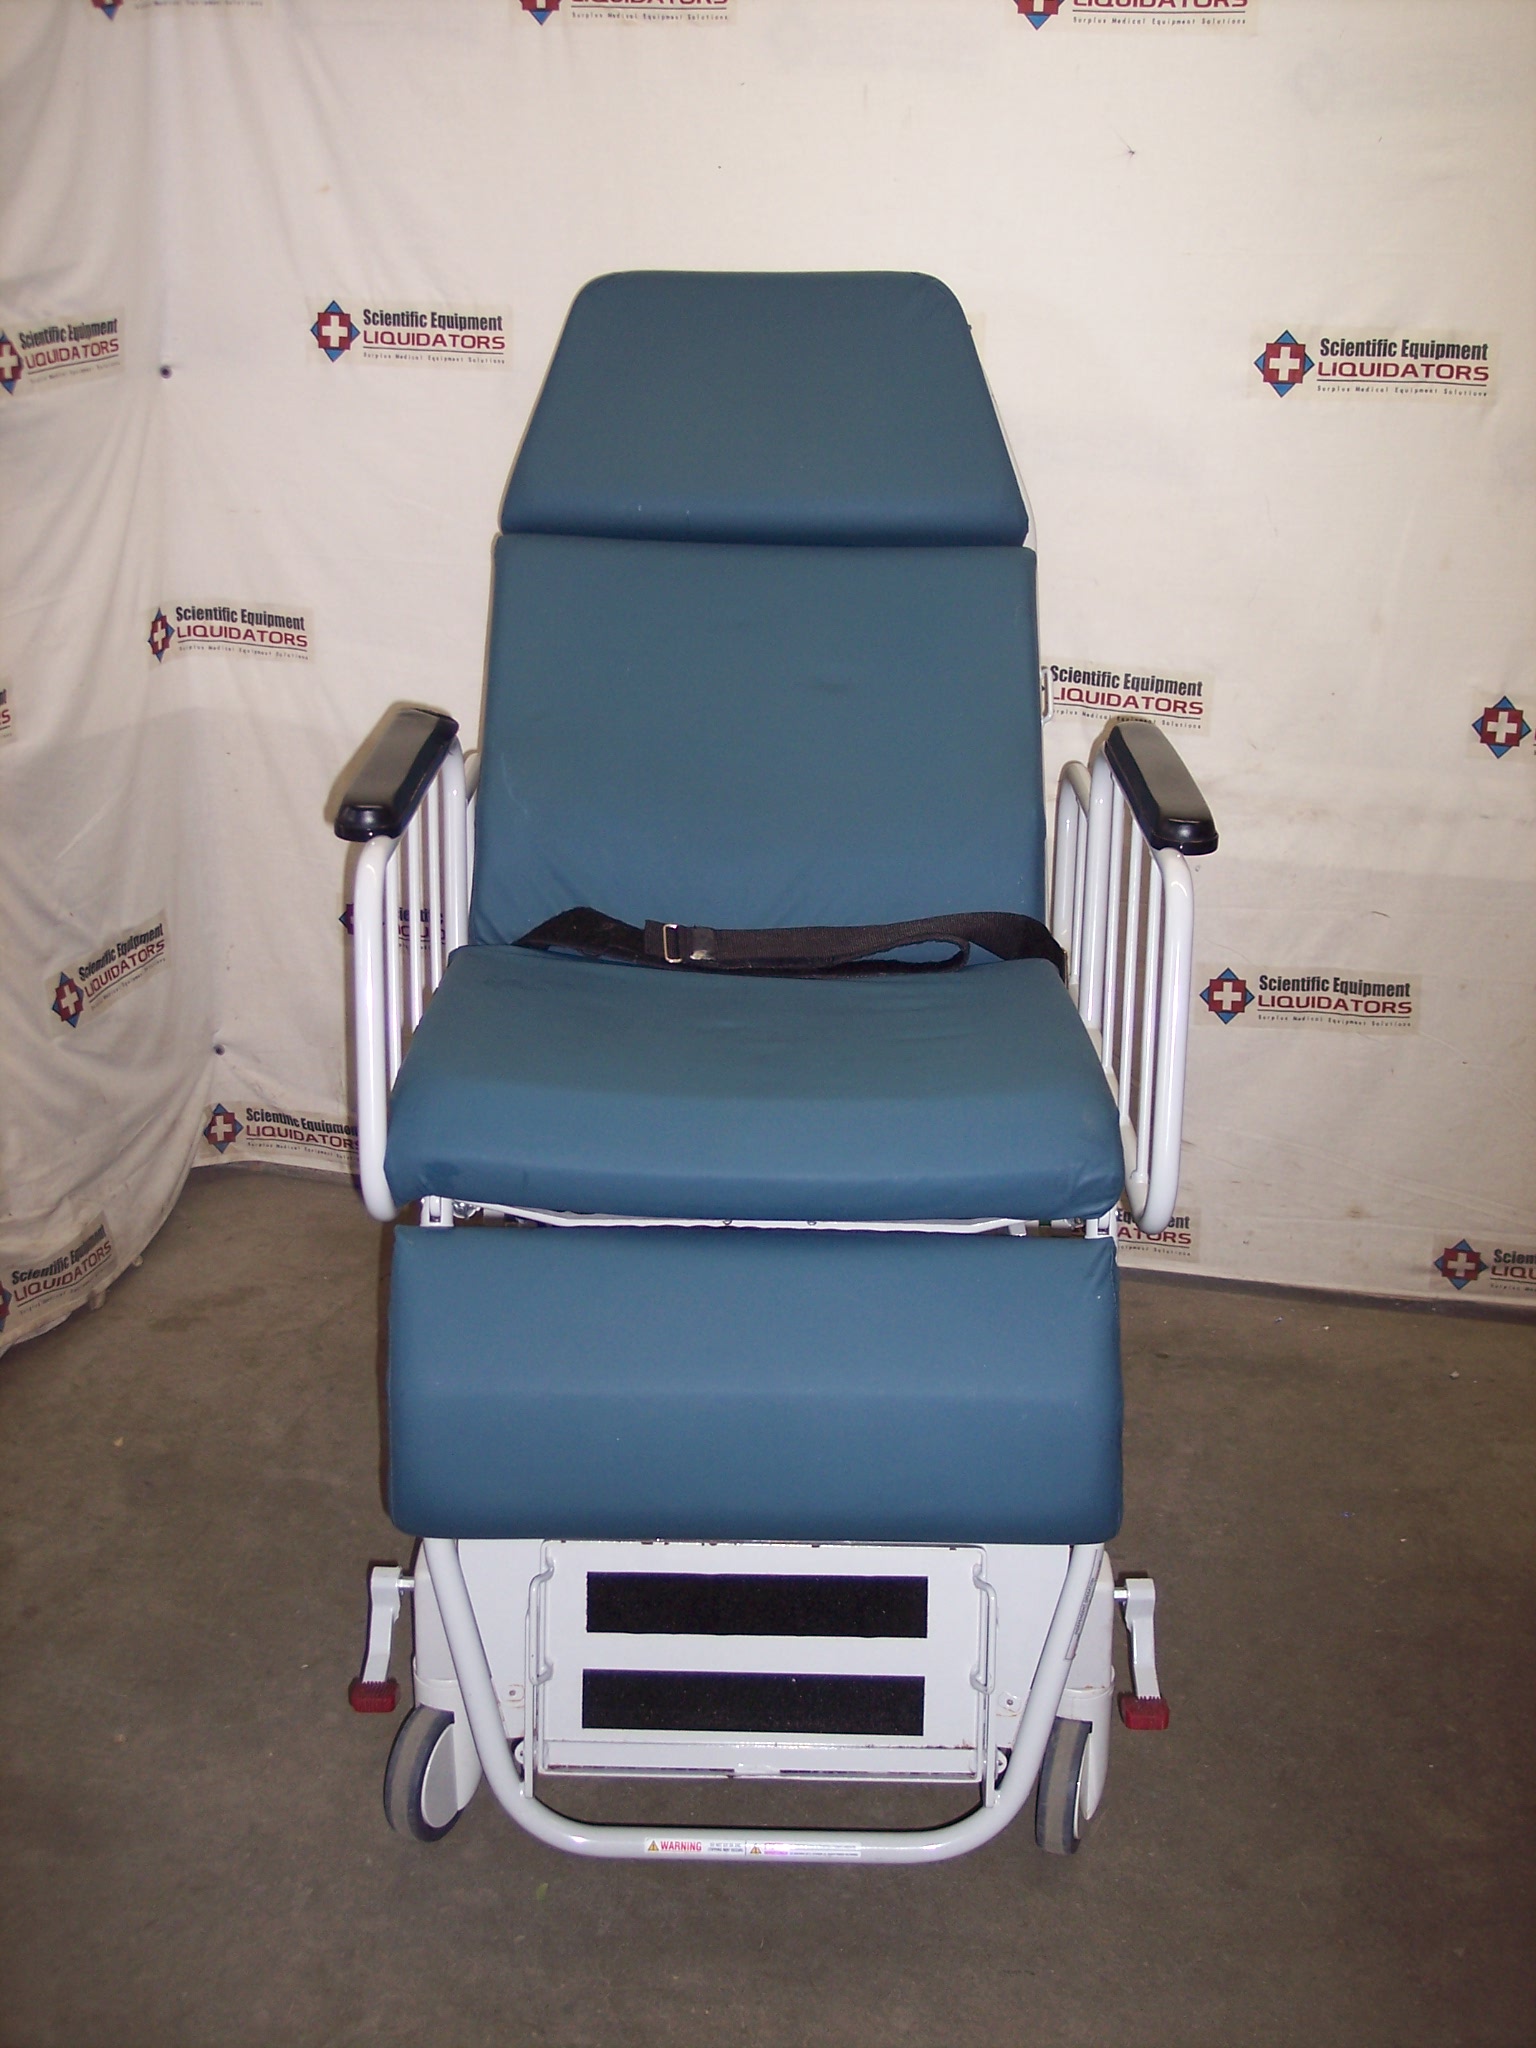 Steris Hausted APC250ST Stretcher /Chair